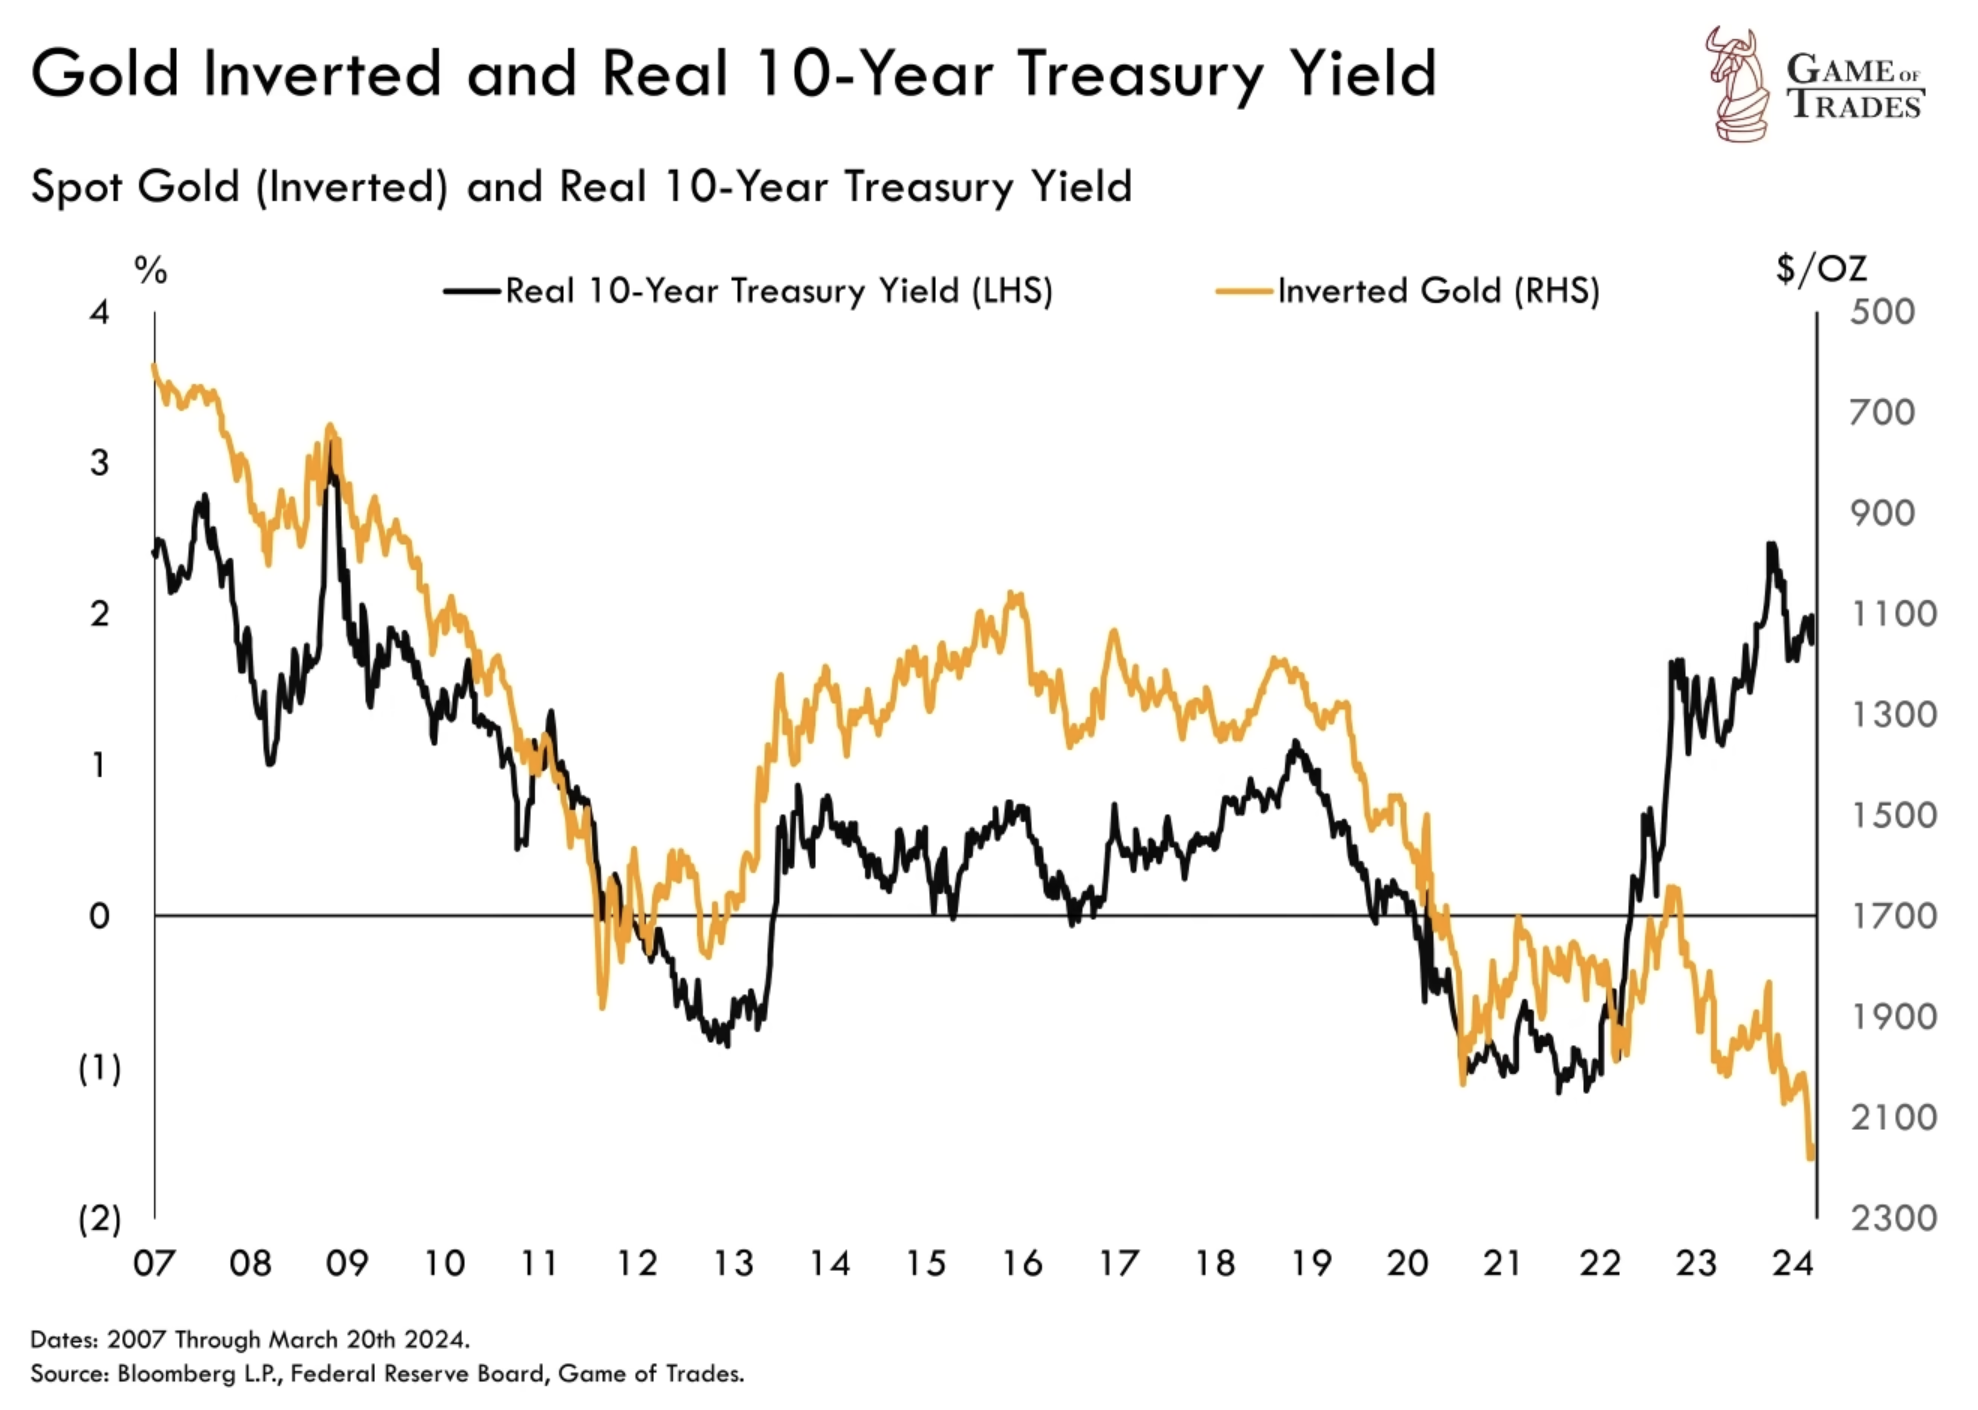 Gold Inverted and Real 10-Year Treasury Yield